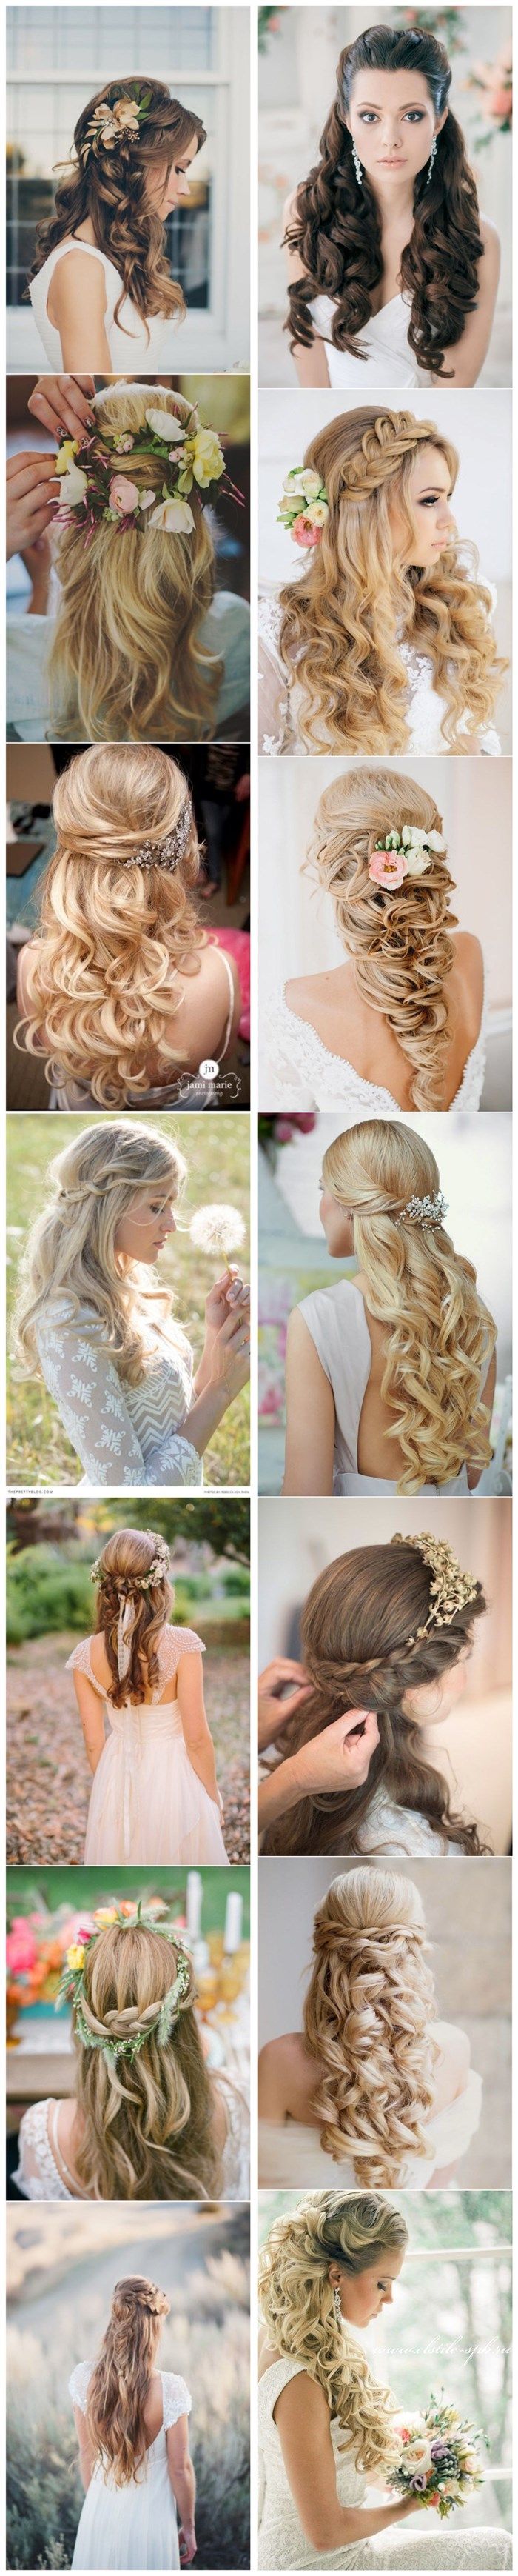 50 Most Beautiful Hairstyles All Women Will Love - Styles Weekly